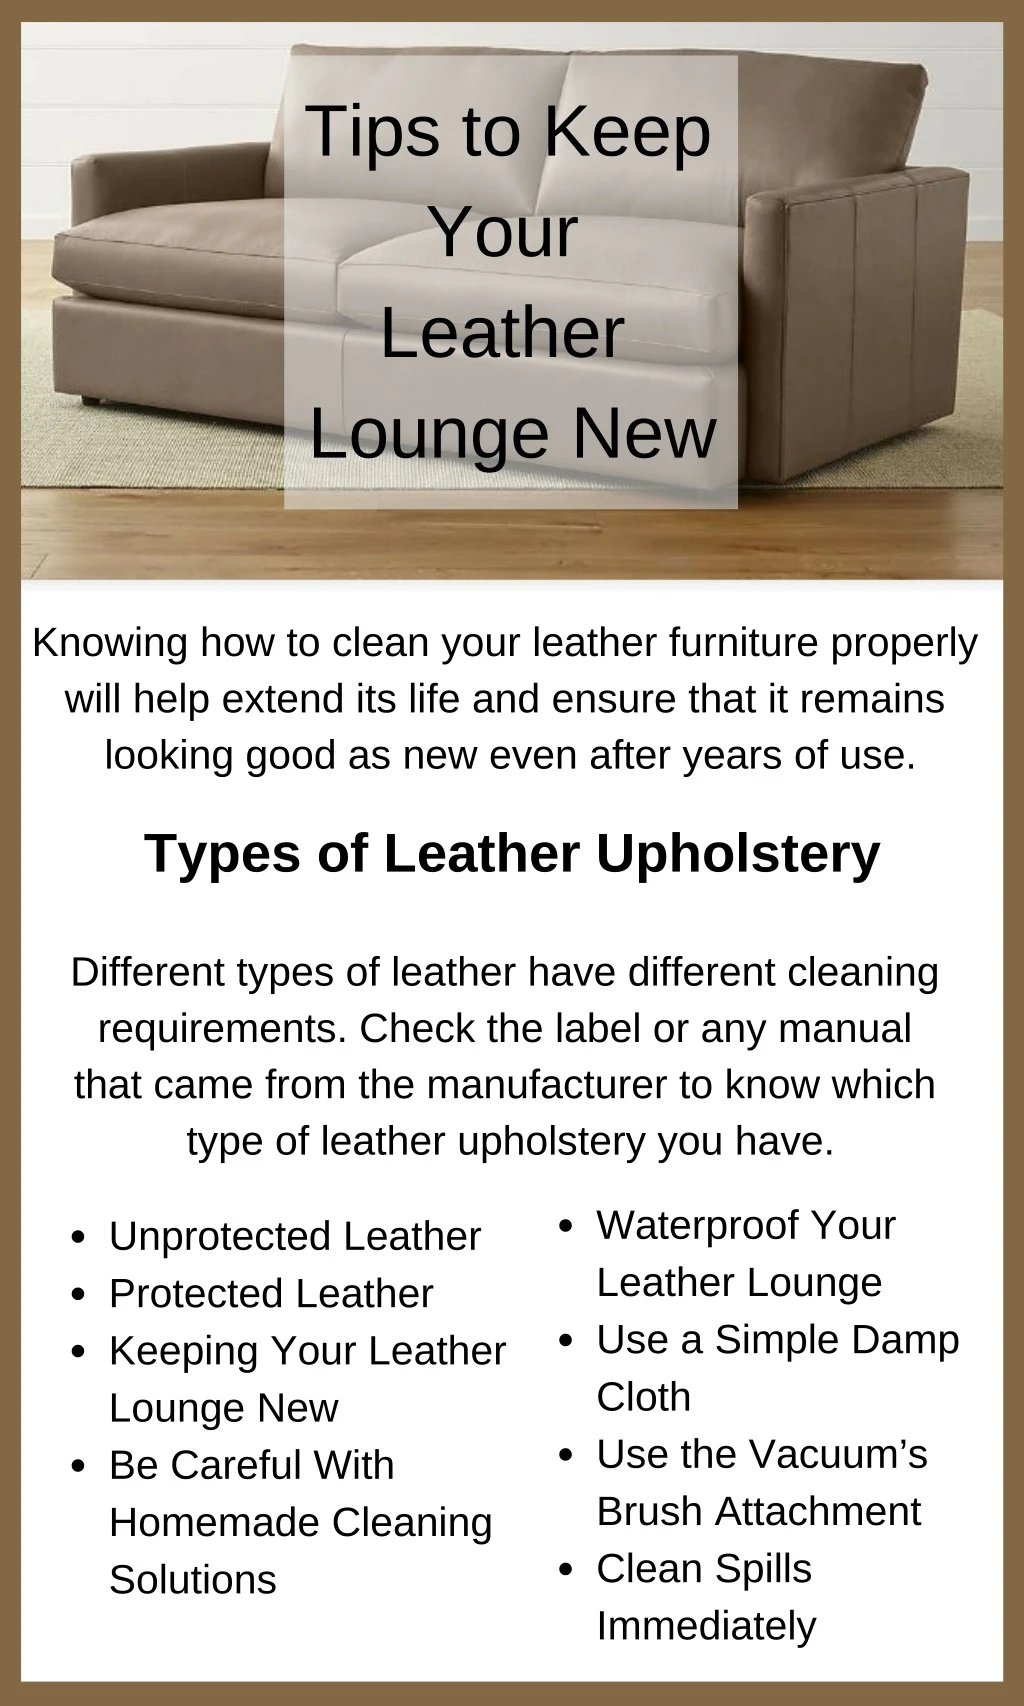 tips to keep your leather lounge new